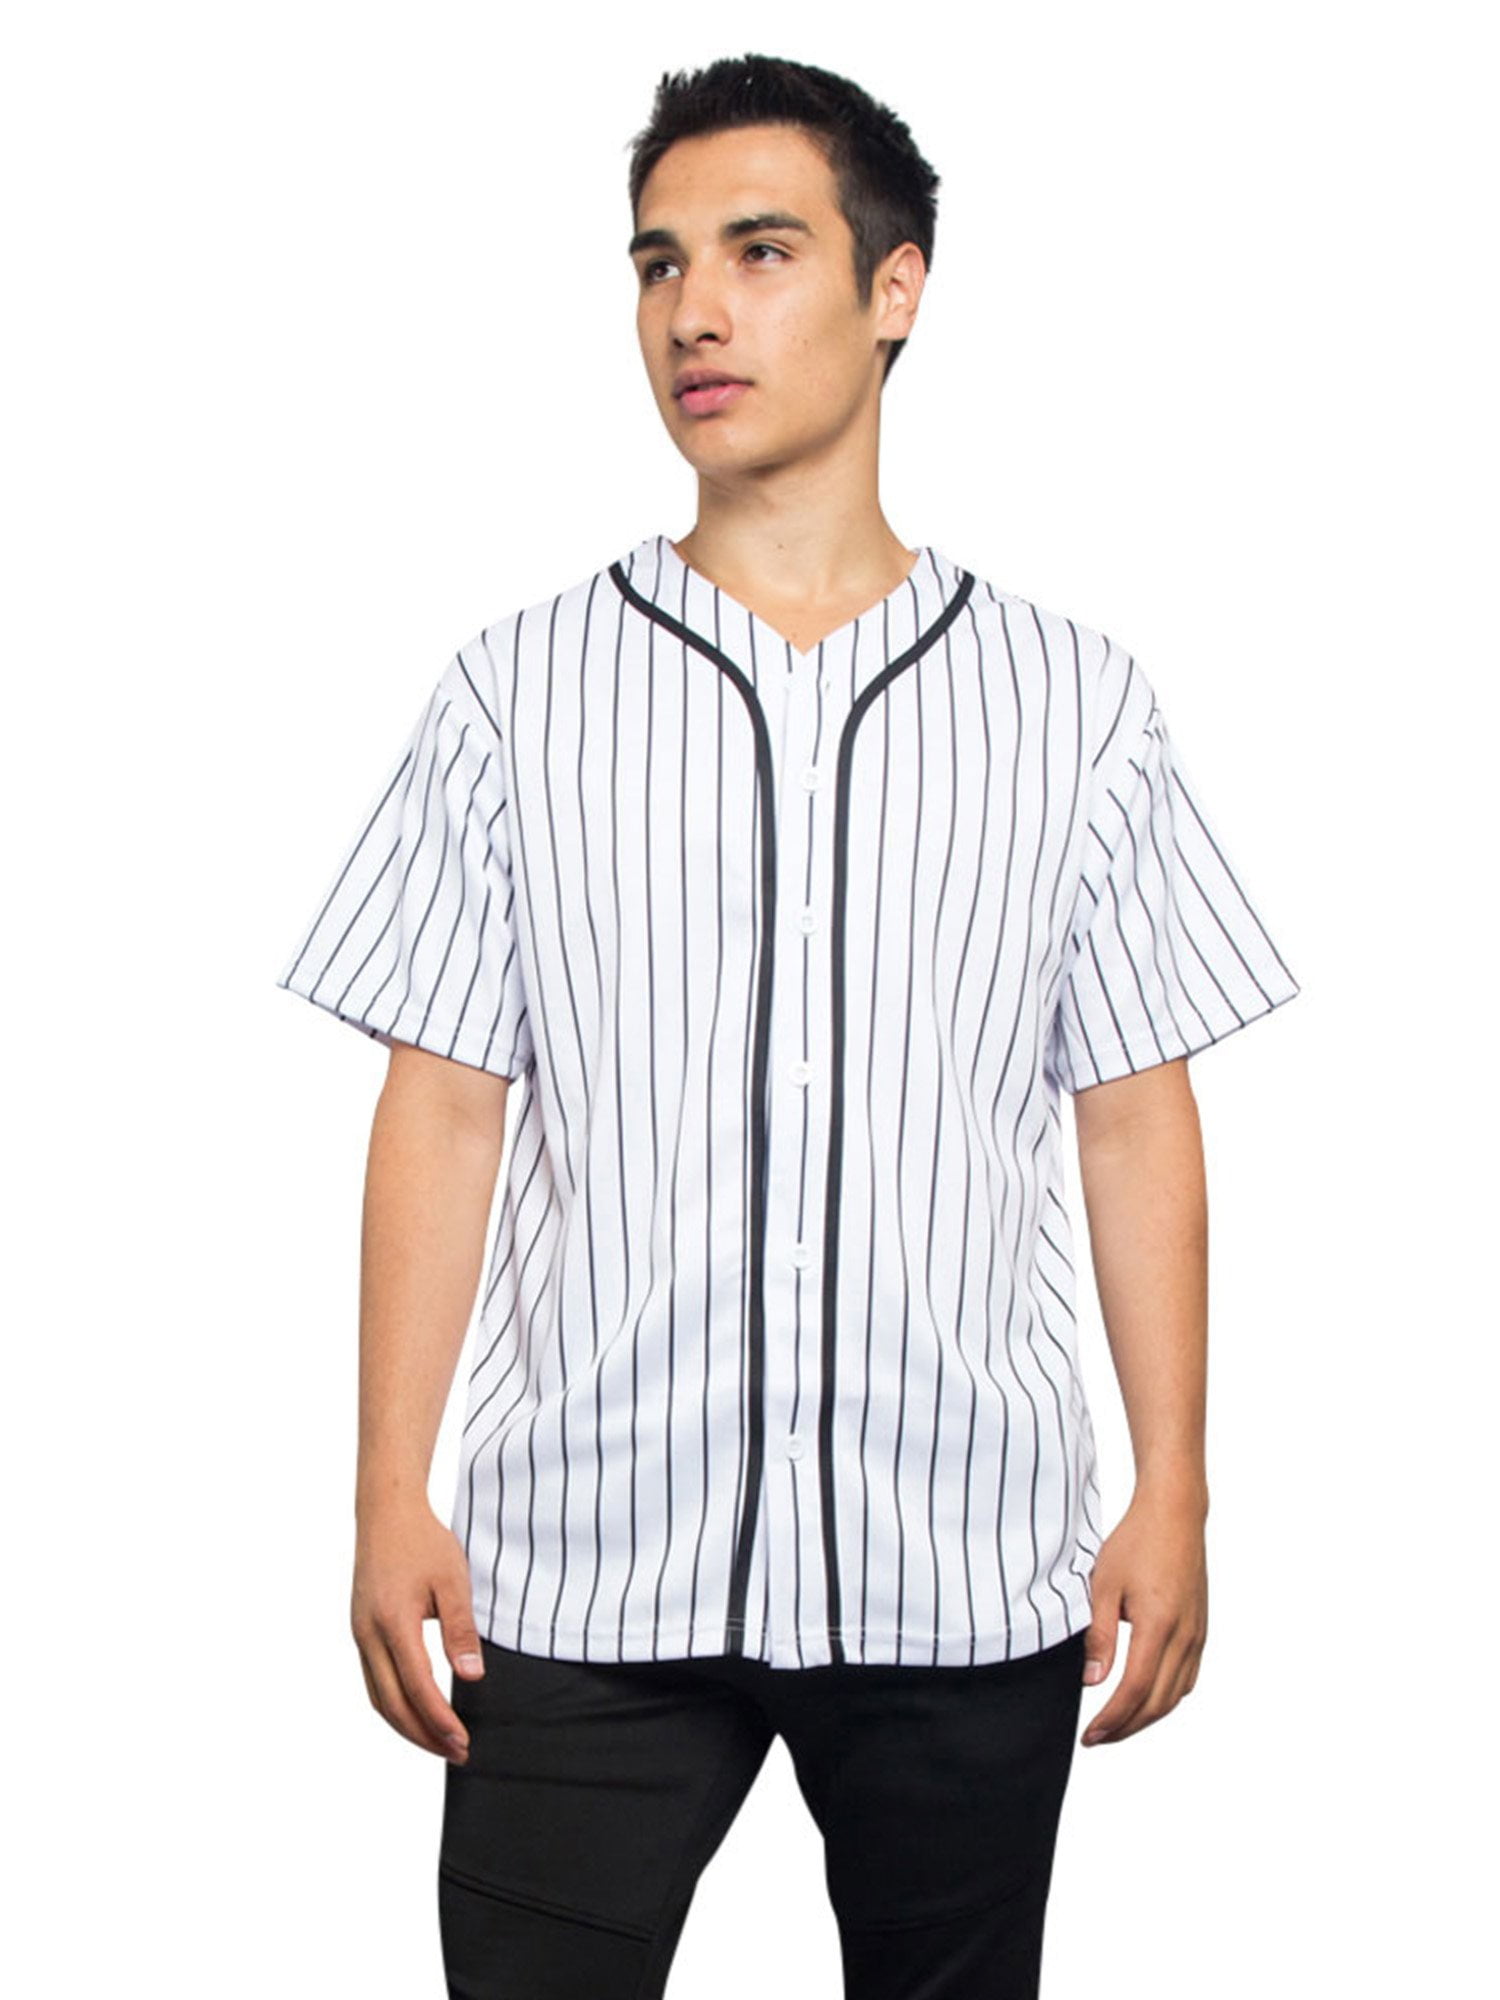 JHKKU Blue Flame Mens Baseball Jersey Button Down Shirts Short Sleeve  Hipster Hip Hop Sports Uniforms XS : Clothing, Shoes & Jewelry 